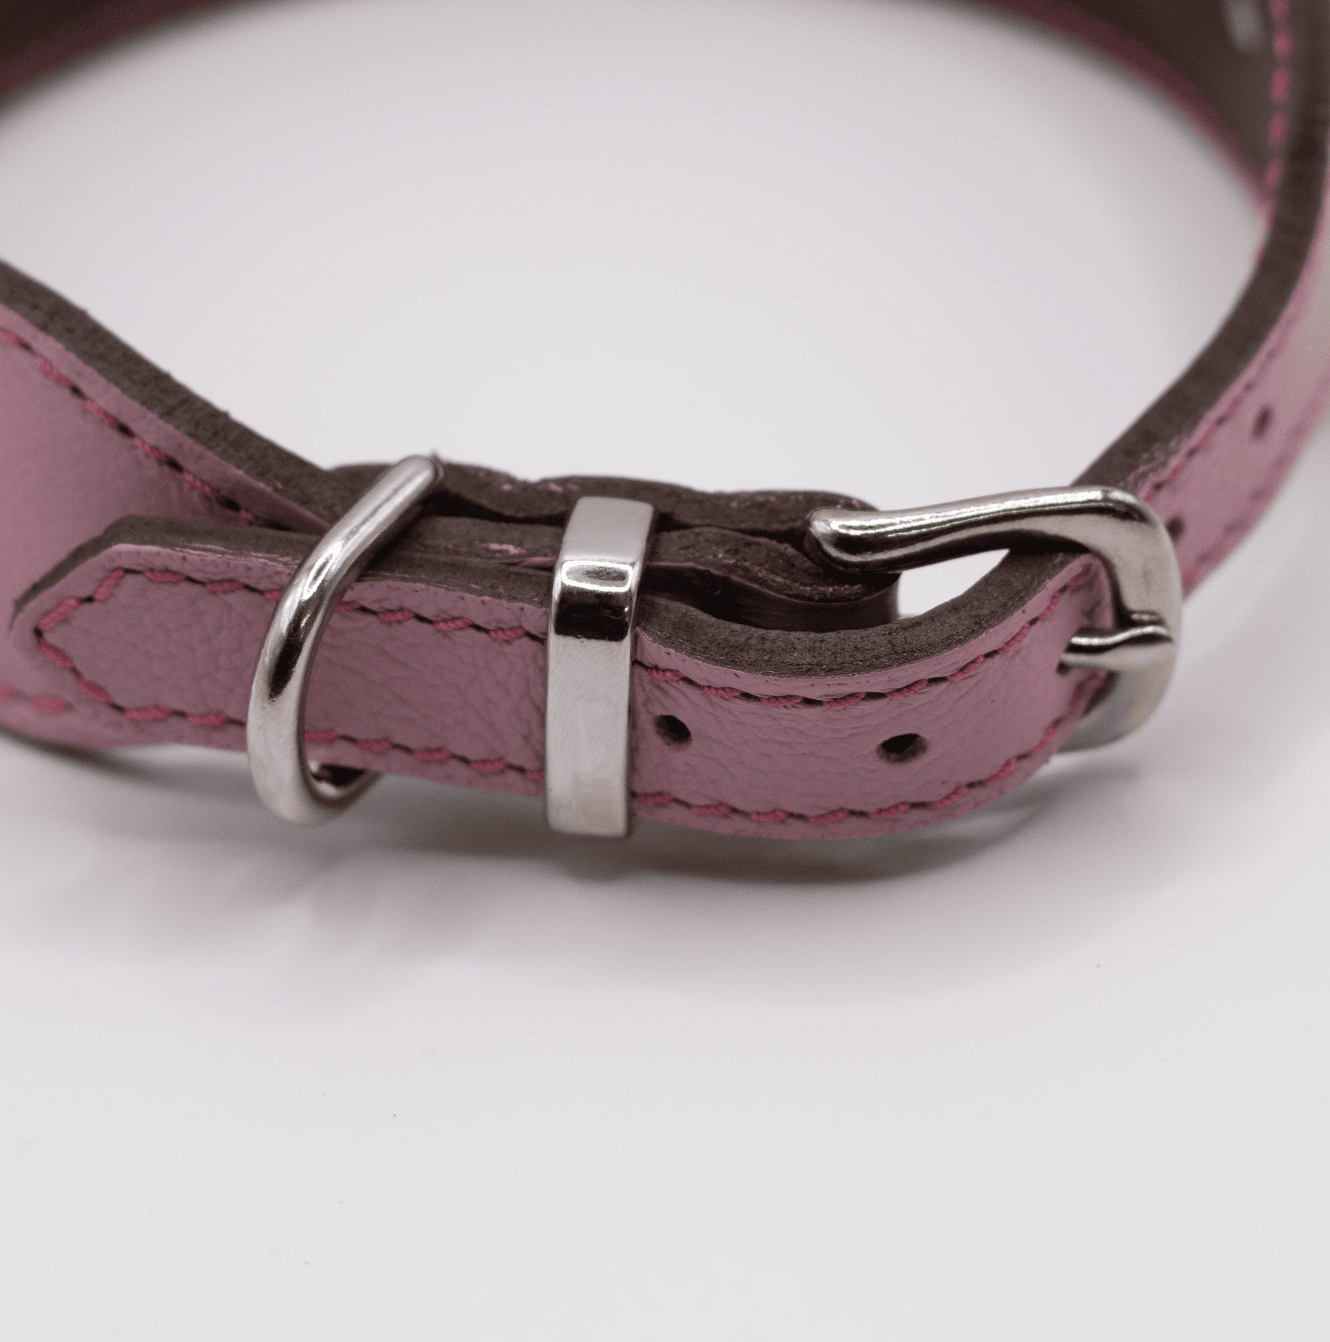 Flat and Wider Soft Leather Dog Collar Pink